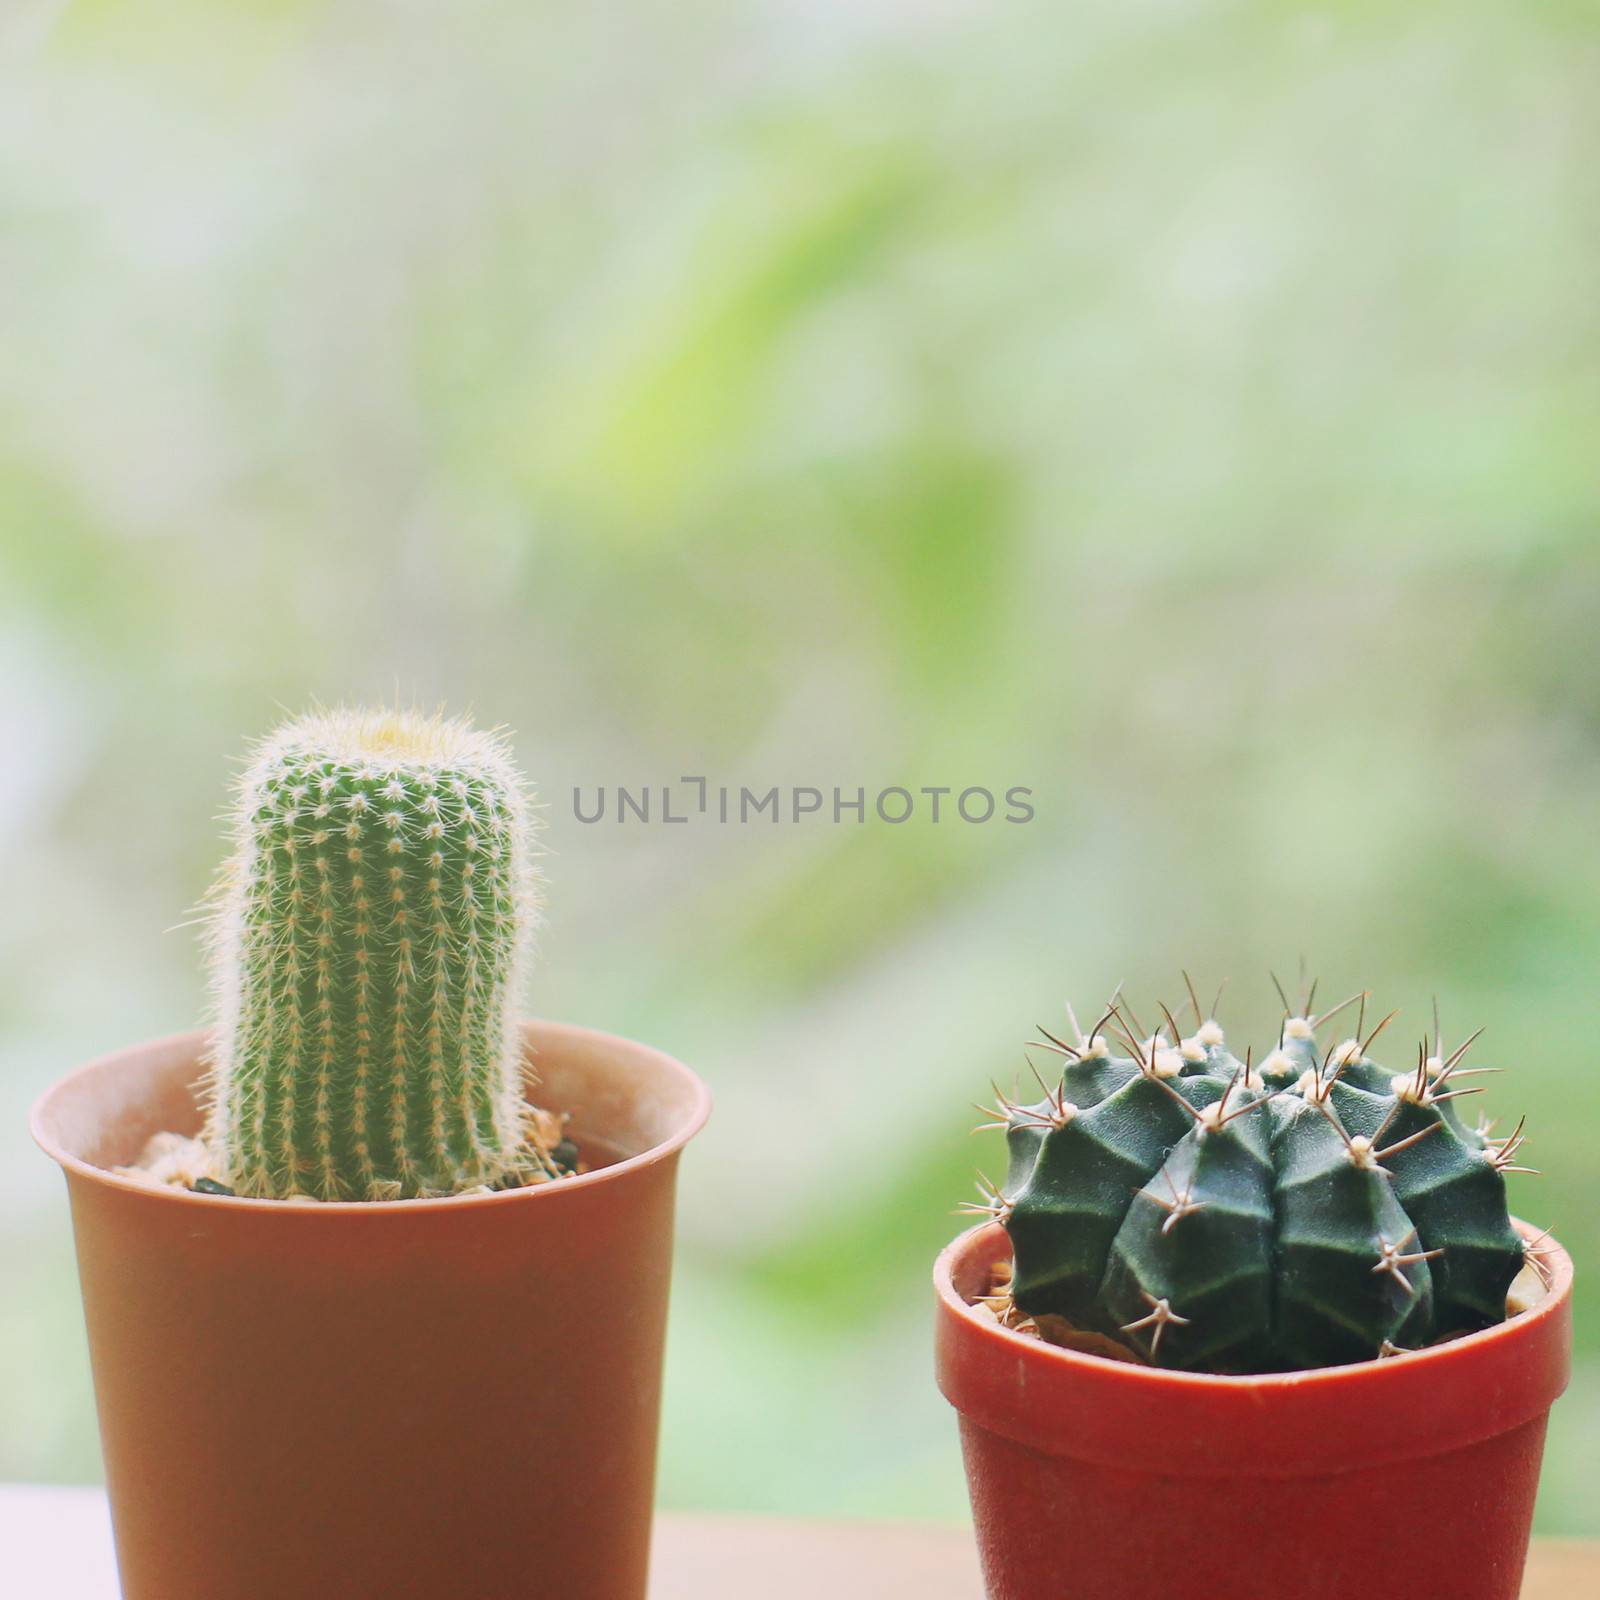 Small cactus for decorated with retro filter effect